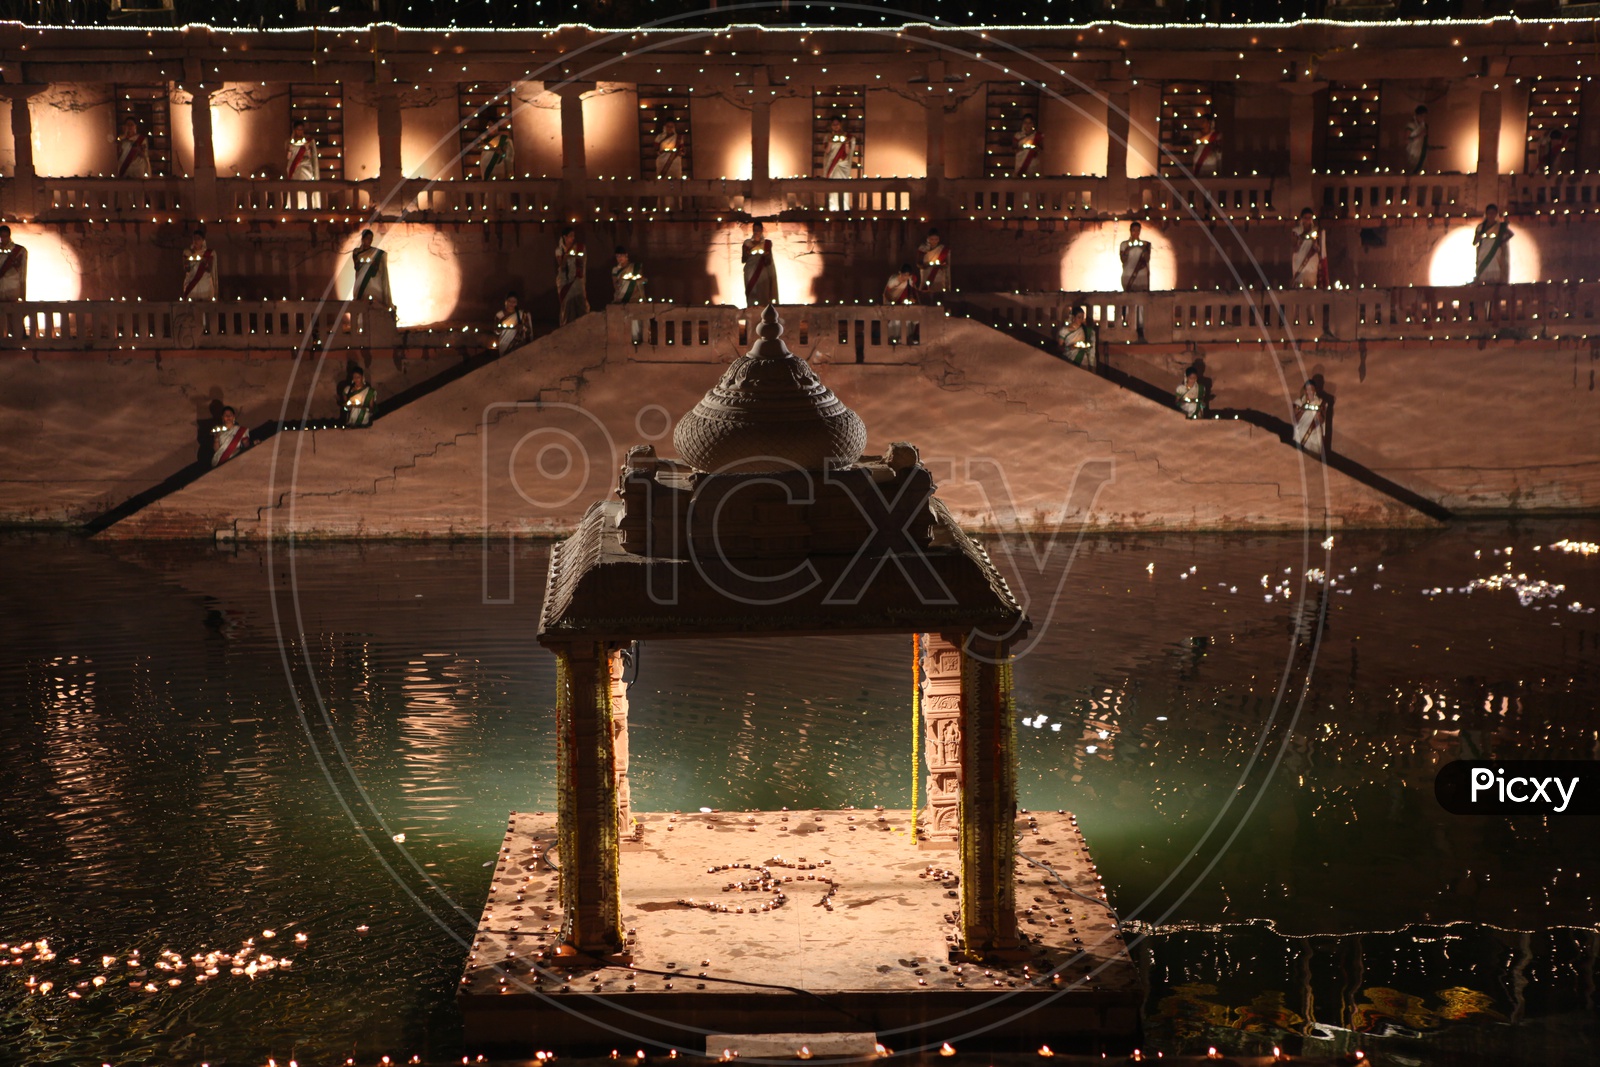 Temple Kolan with lights and diyas in the night